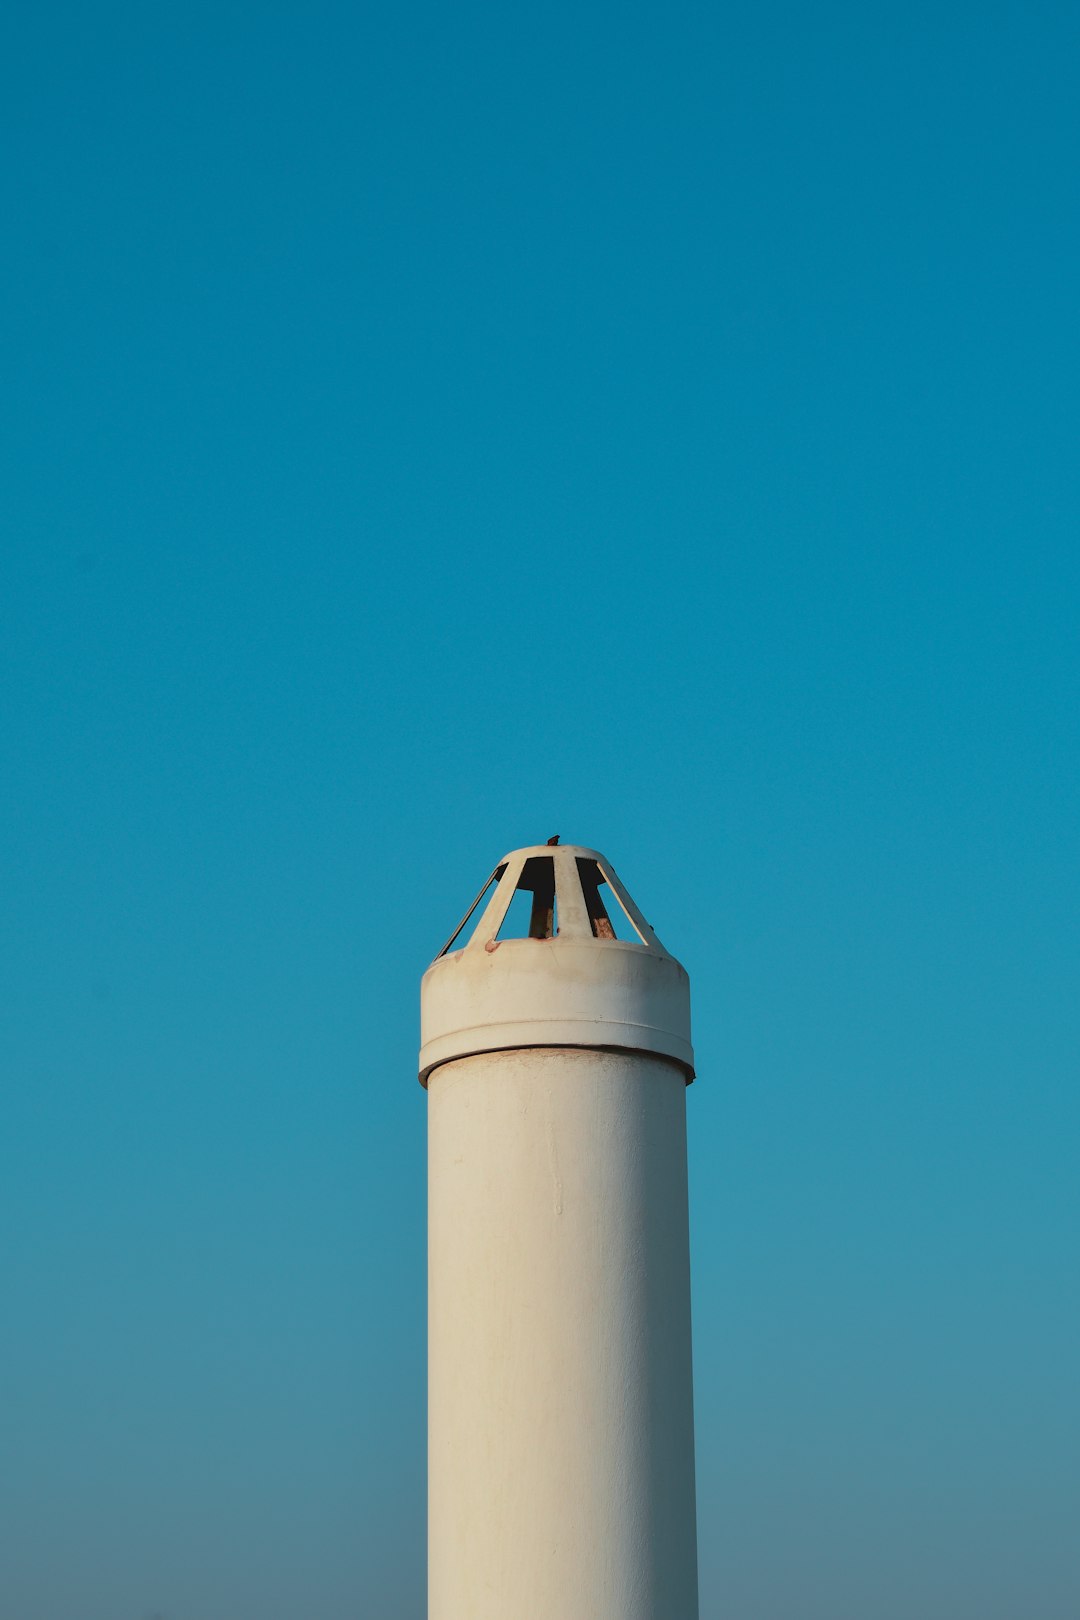 white and brown concrete tower under blue sky during daytime